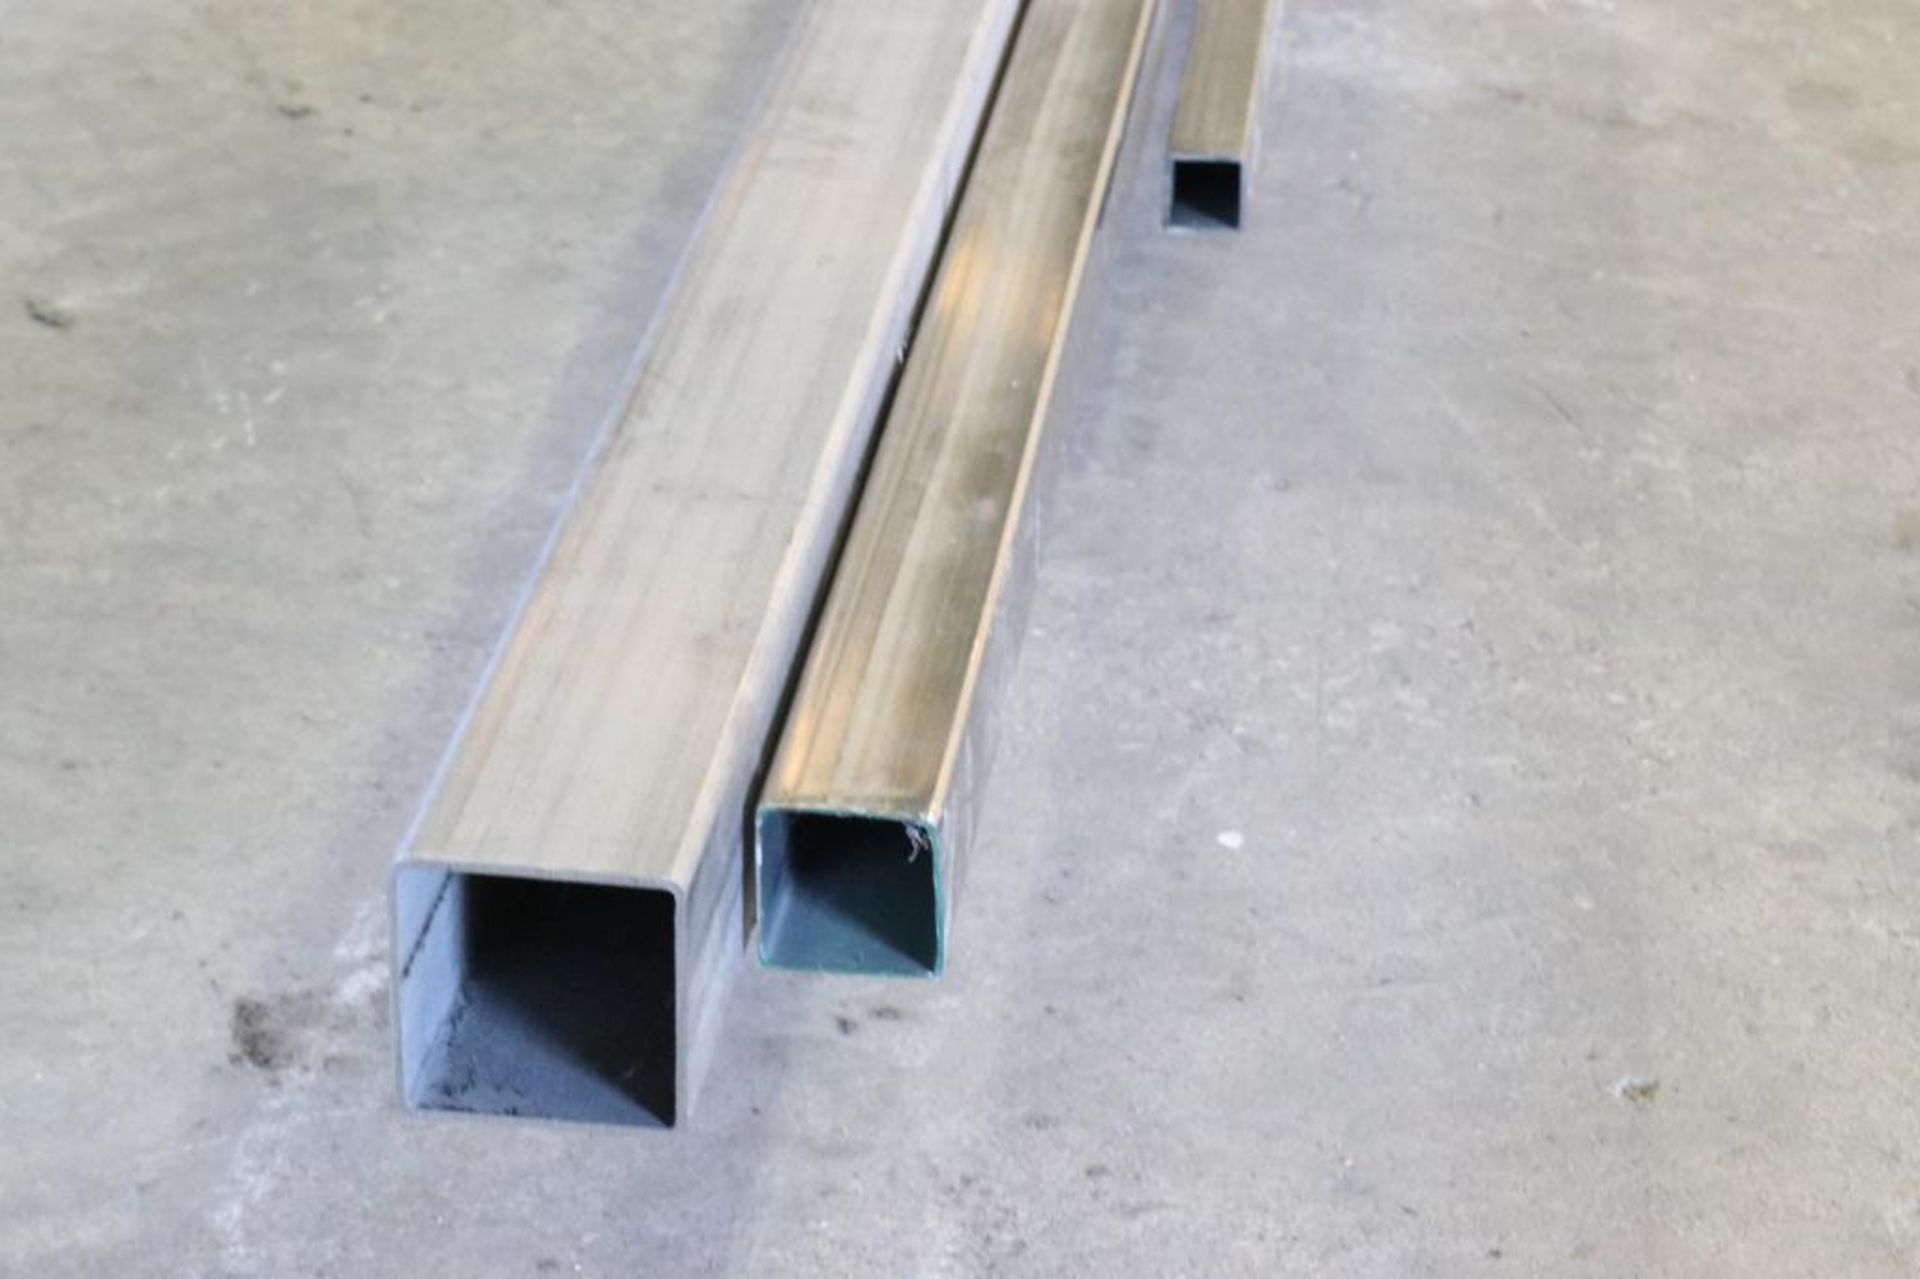 15 Ft. x 1 1/4" Sq Tube - Stainless - Image 4 of 4